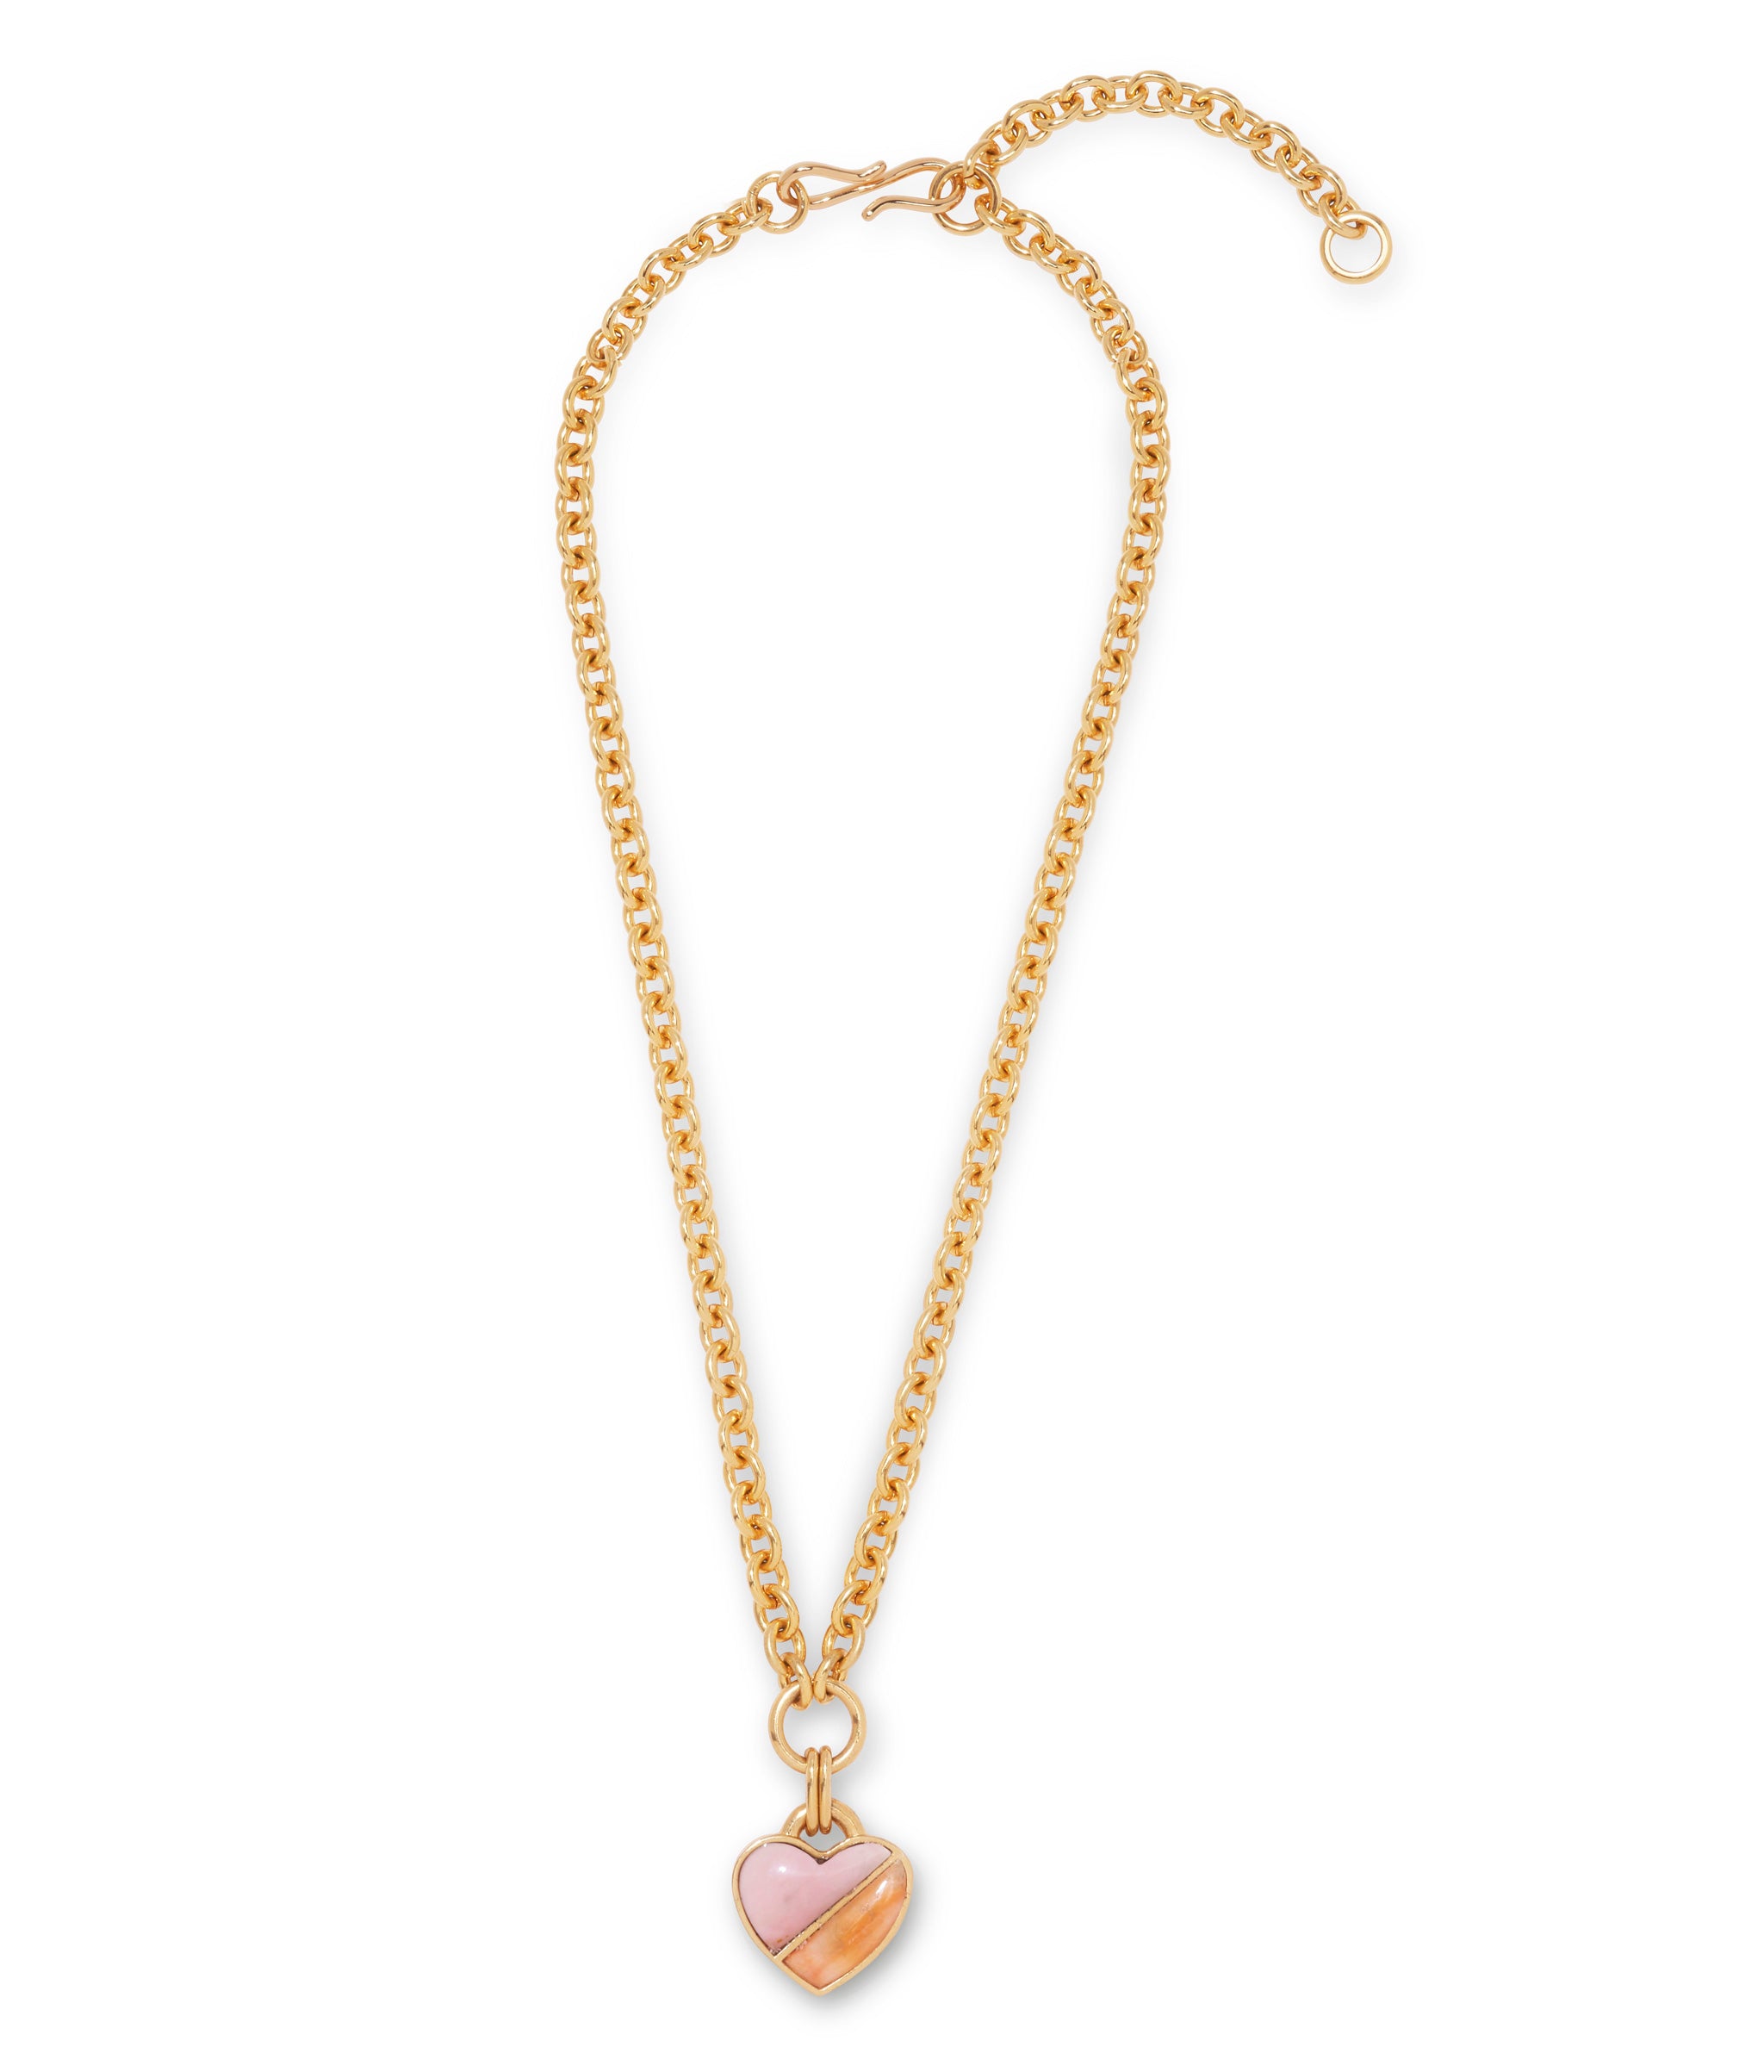 Atlantic Heart Necklace. Gold-plated brass curb chain with small heart pendant set with pink opal and spiny oyster.